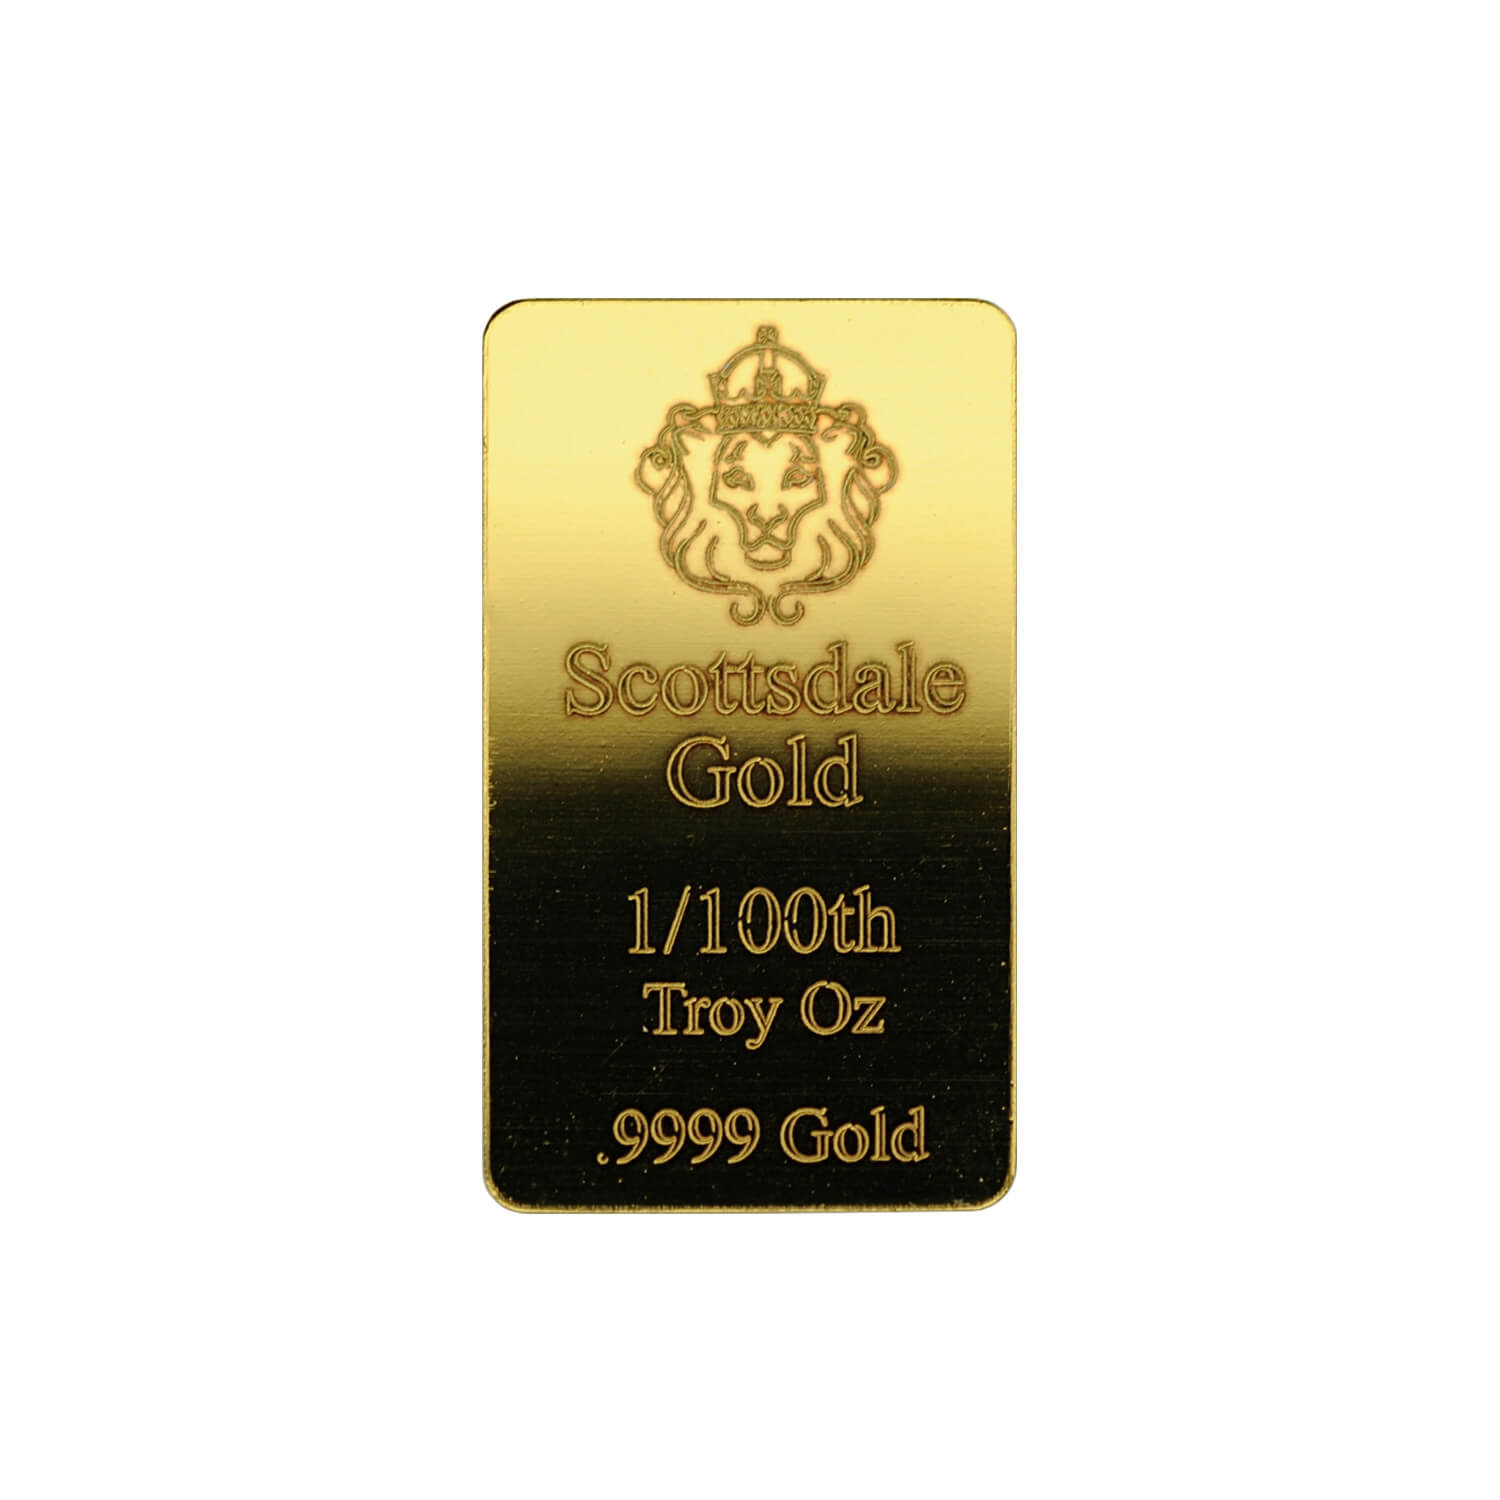 Quick and Easy Conversion: how many grams is 1/100th of an ounce of gold ?